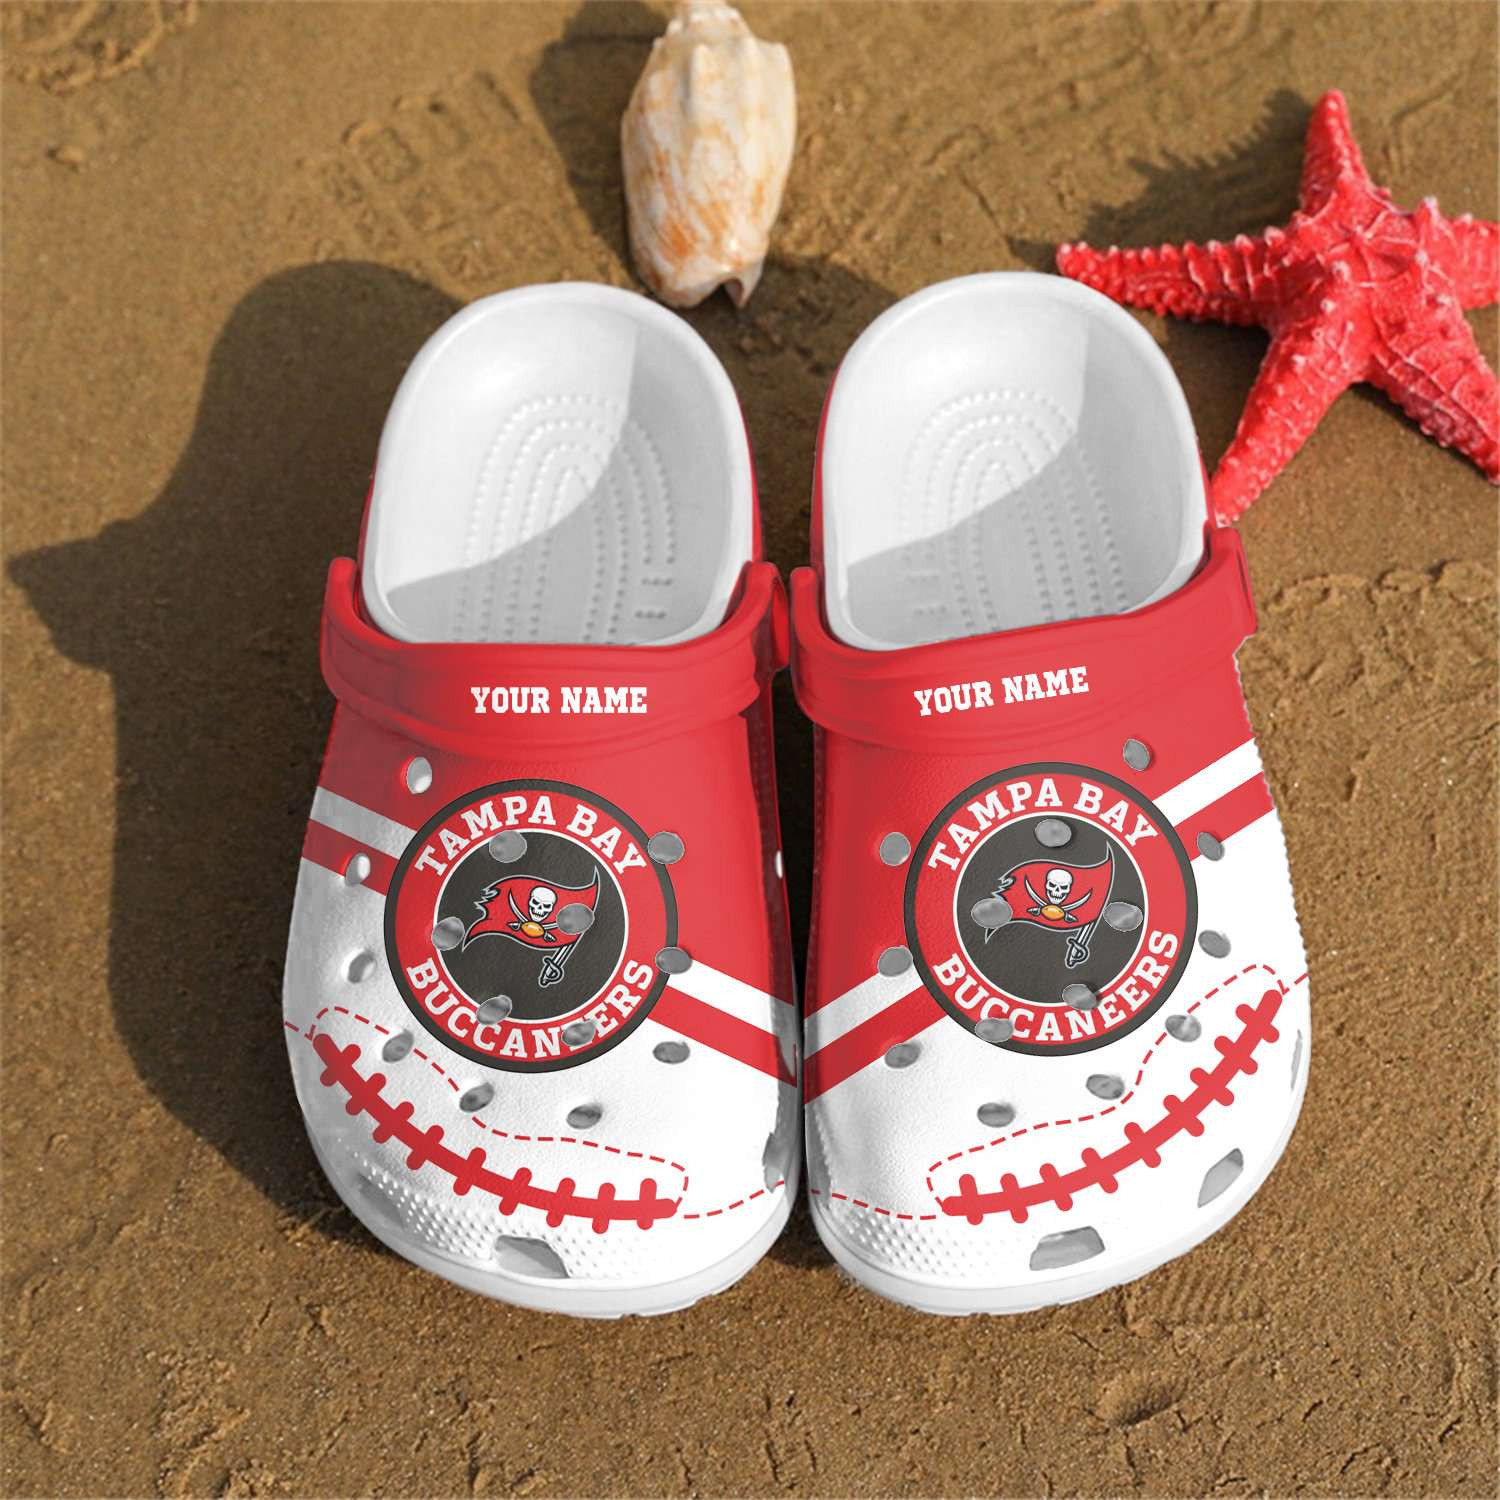 Personalized Tampa Bay Buccaneers Nfl Fans Crocs Crocband Clogs